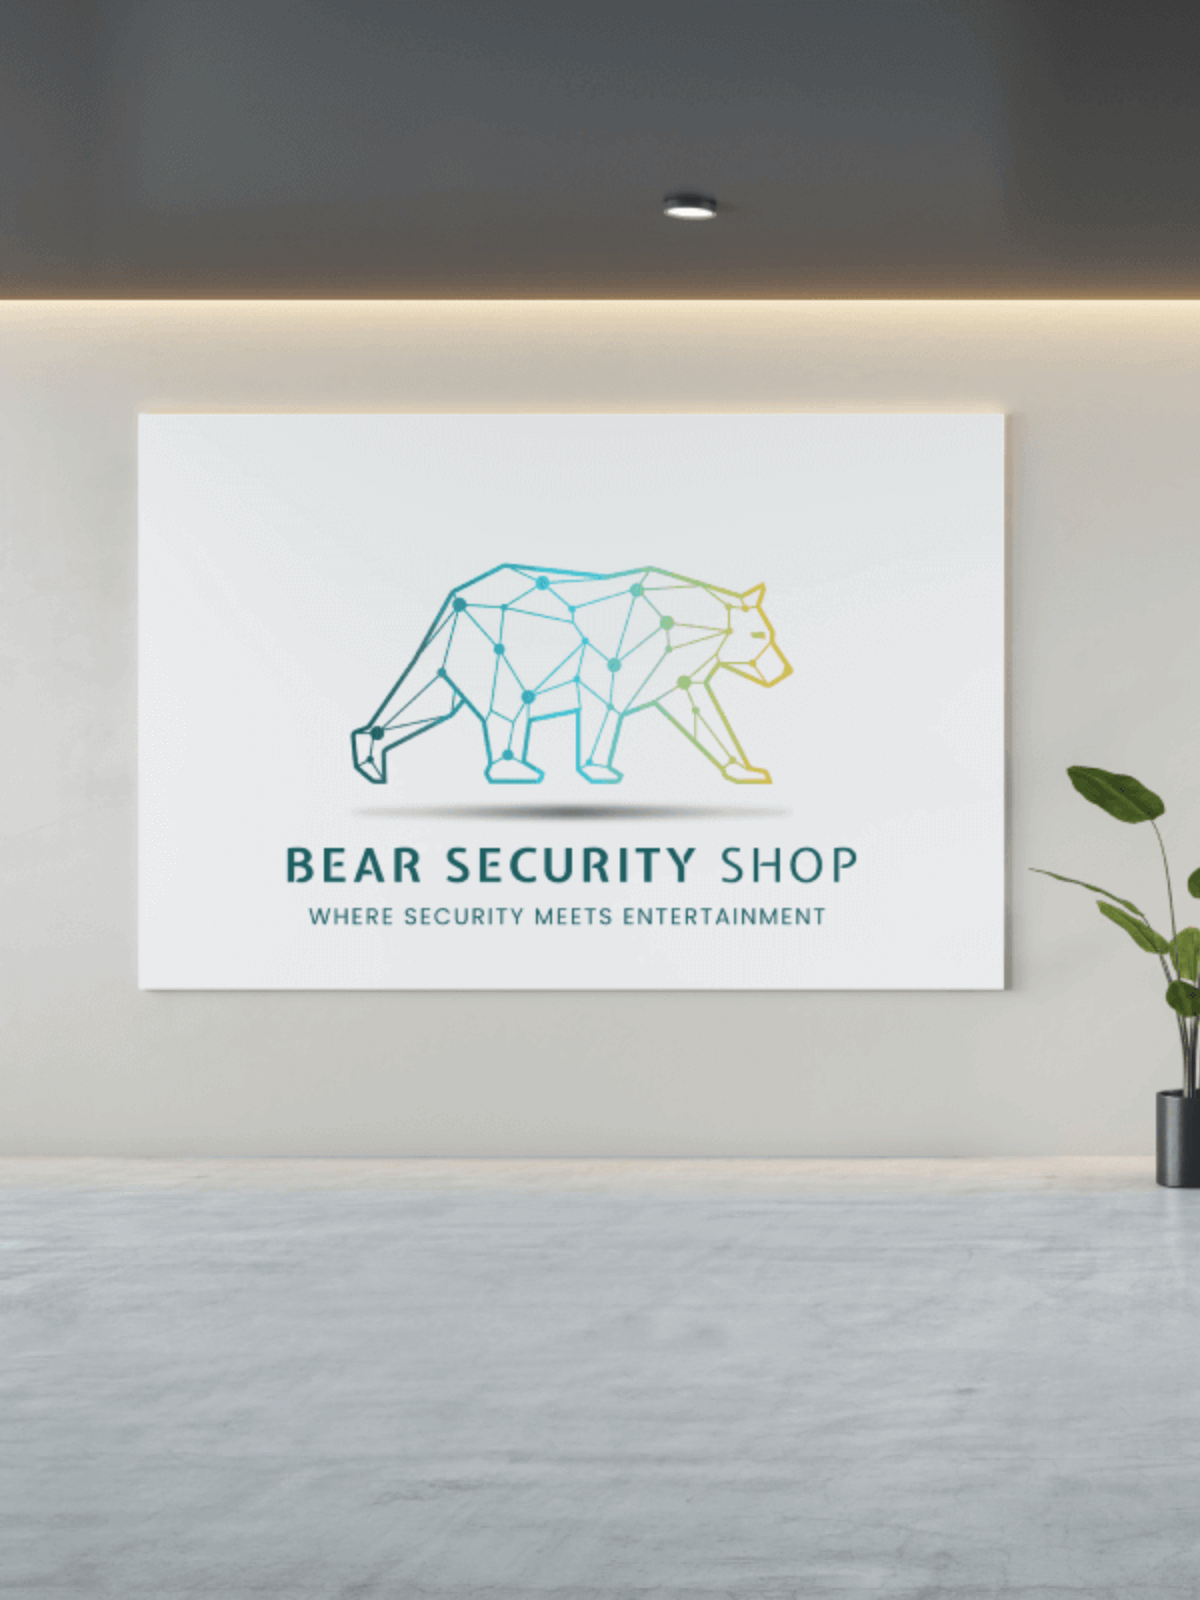 Mobile center logo whiteboard Office image with a whiteboard and Bear Security Shop Logo 